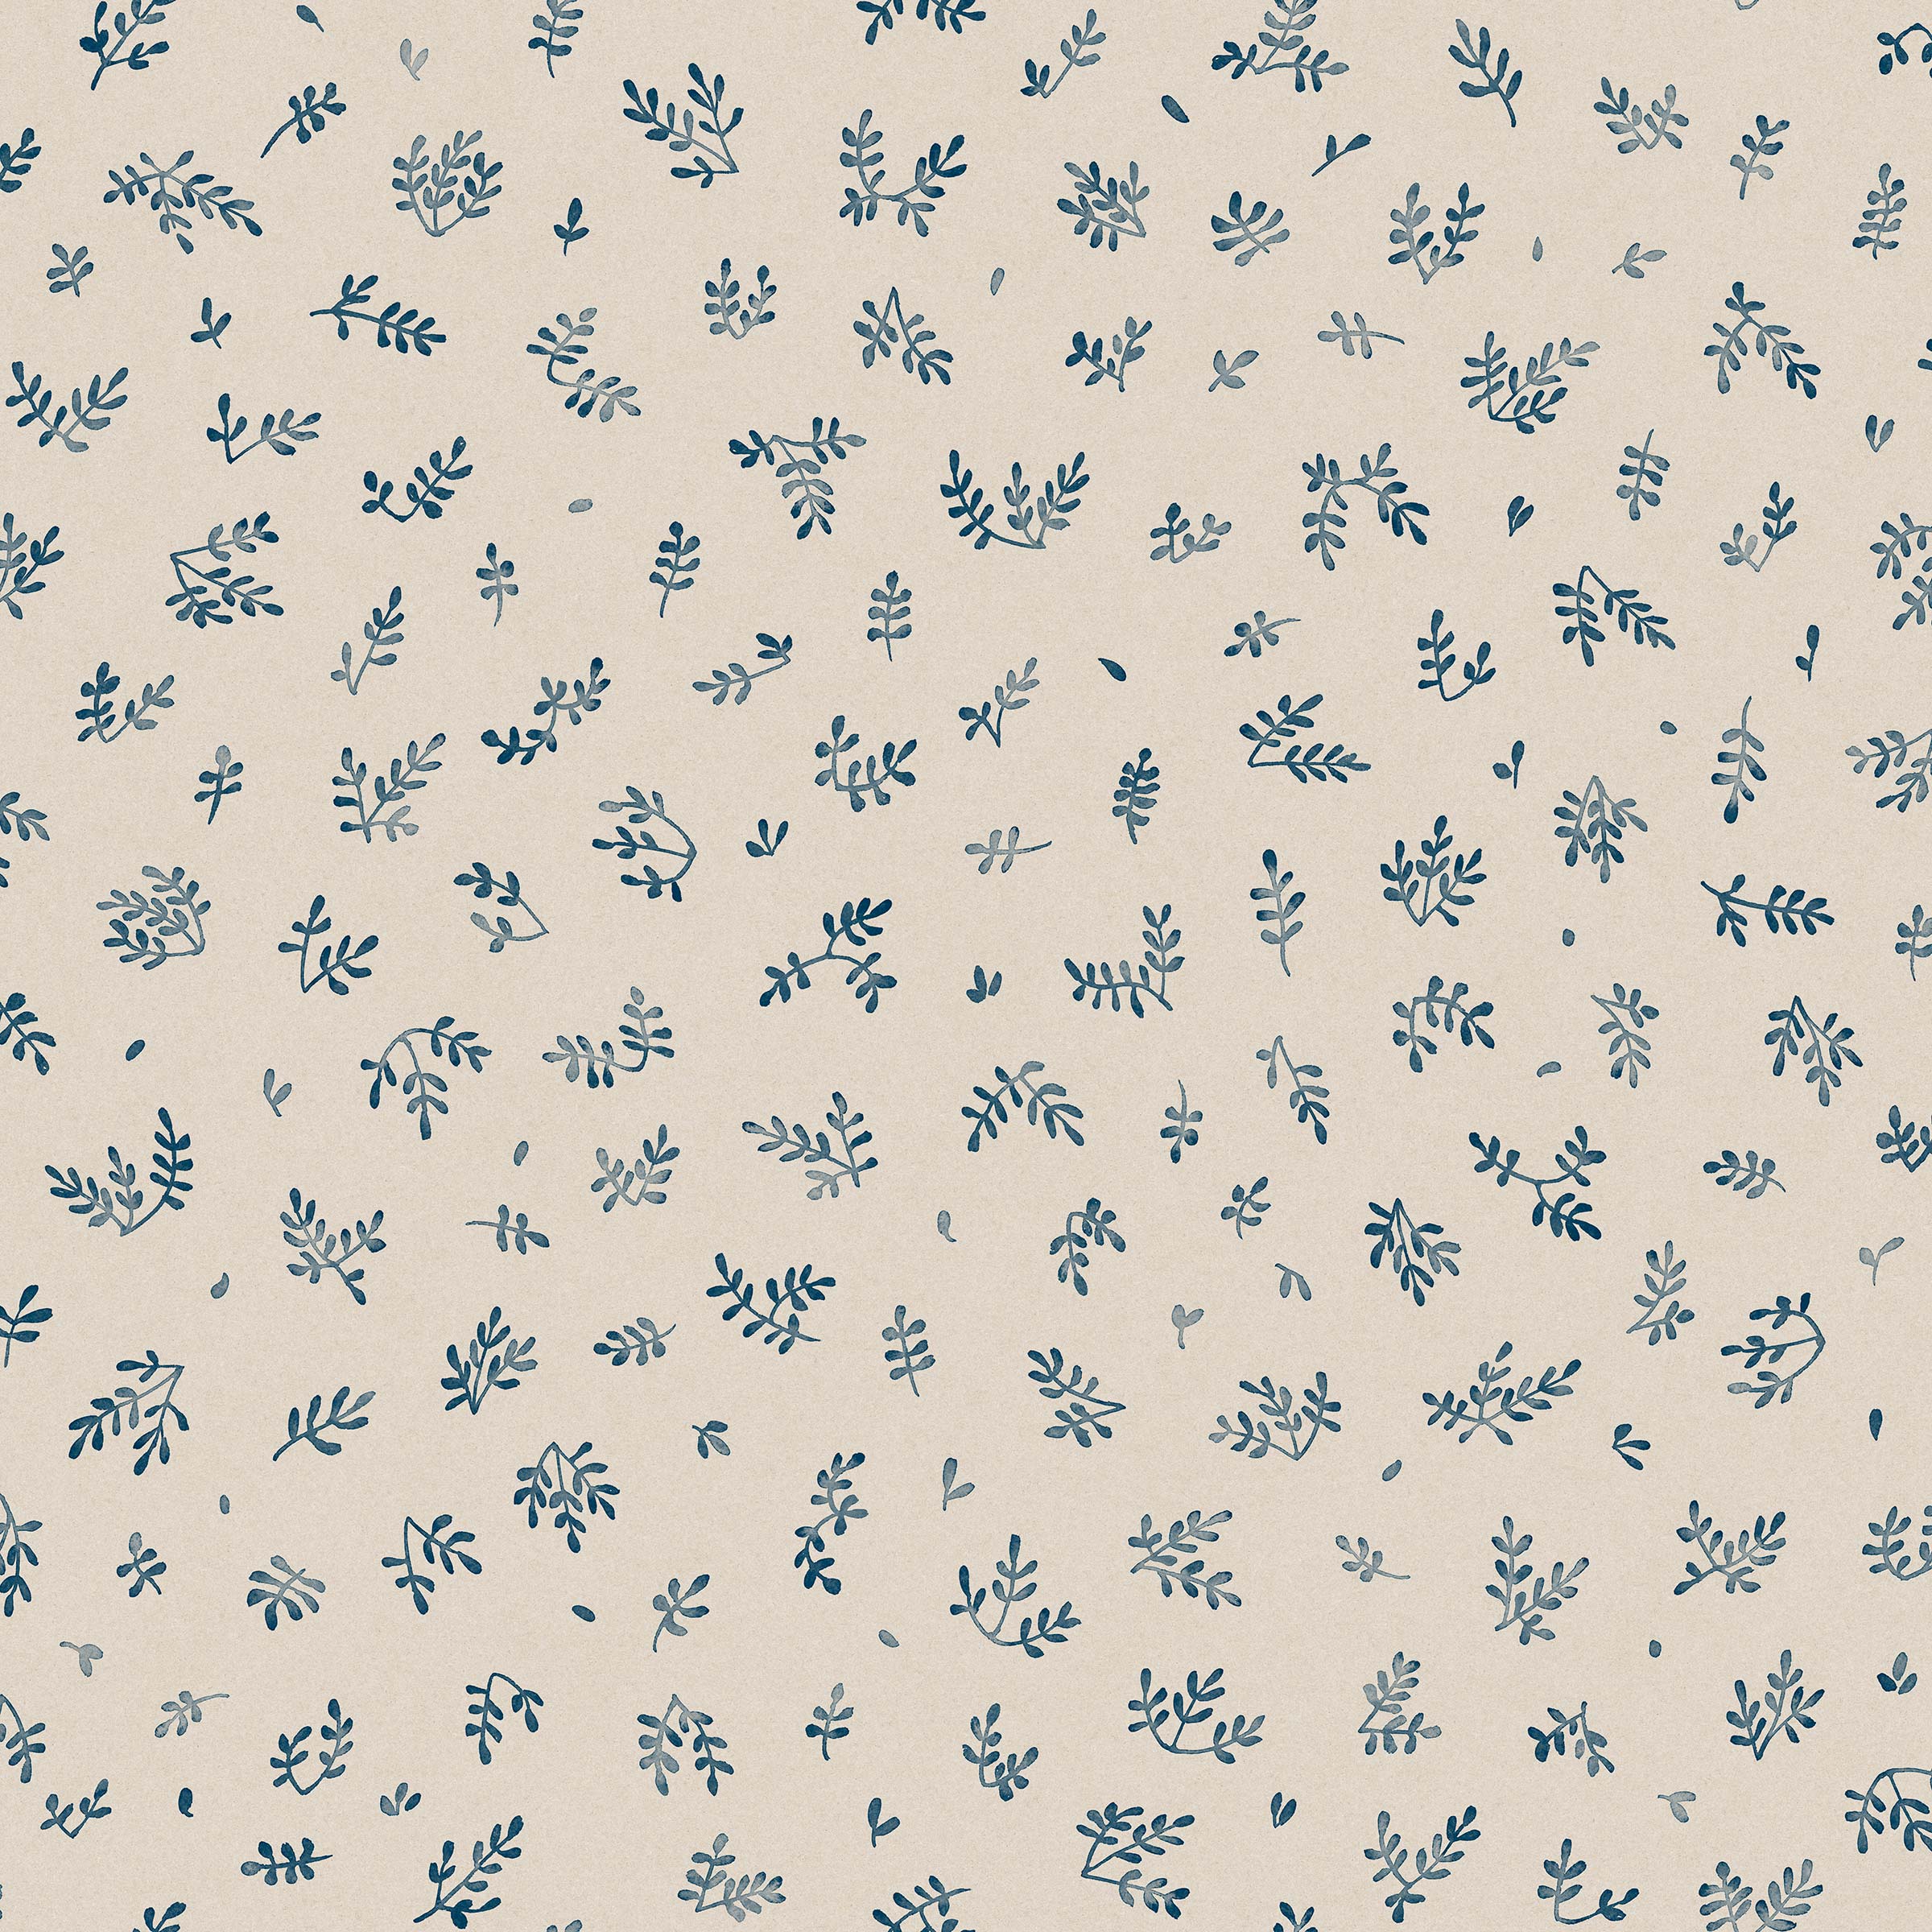 Detail of wallpaper in a minimal repeating leaf print in navy on a cream field.